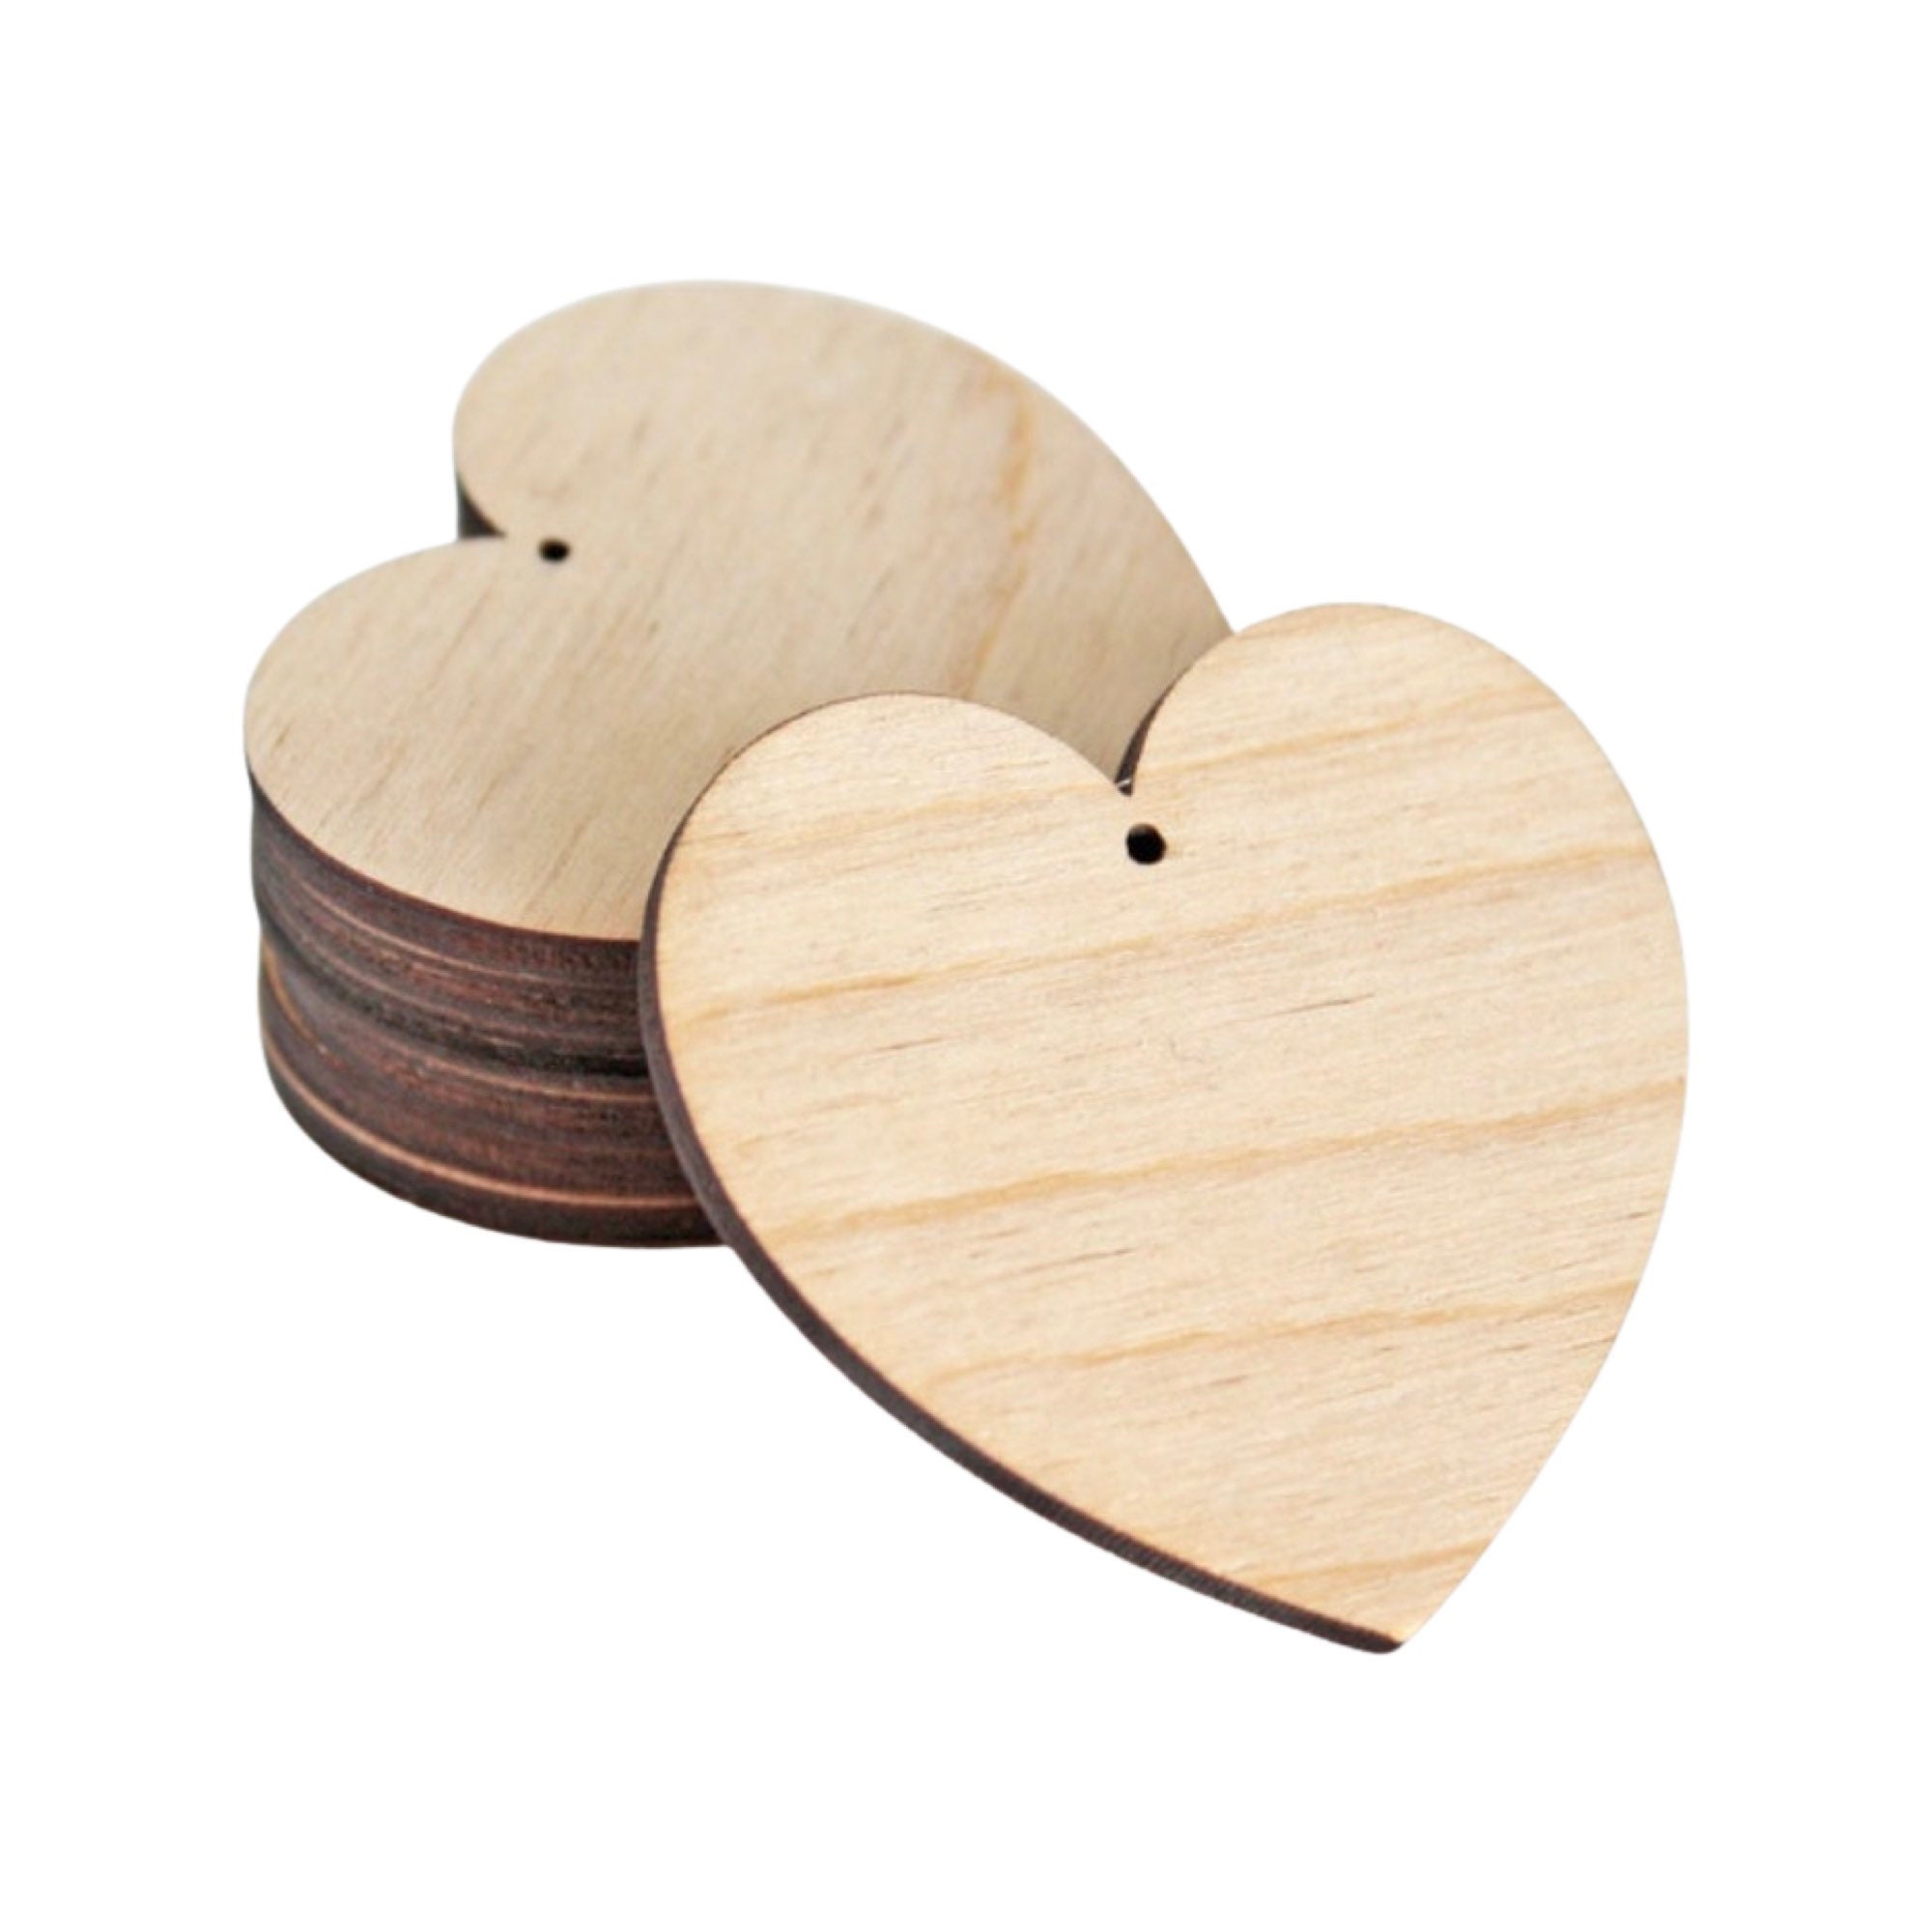 Wooden Heart Cutouts for Crafts 10 inch, 1/4 inch Thick, Pack of 10  Unfinished Wood Hearts, by Woodpeckers | Great DIY Décor for Valentines Day  and